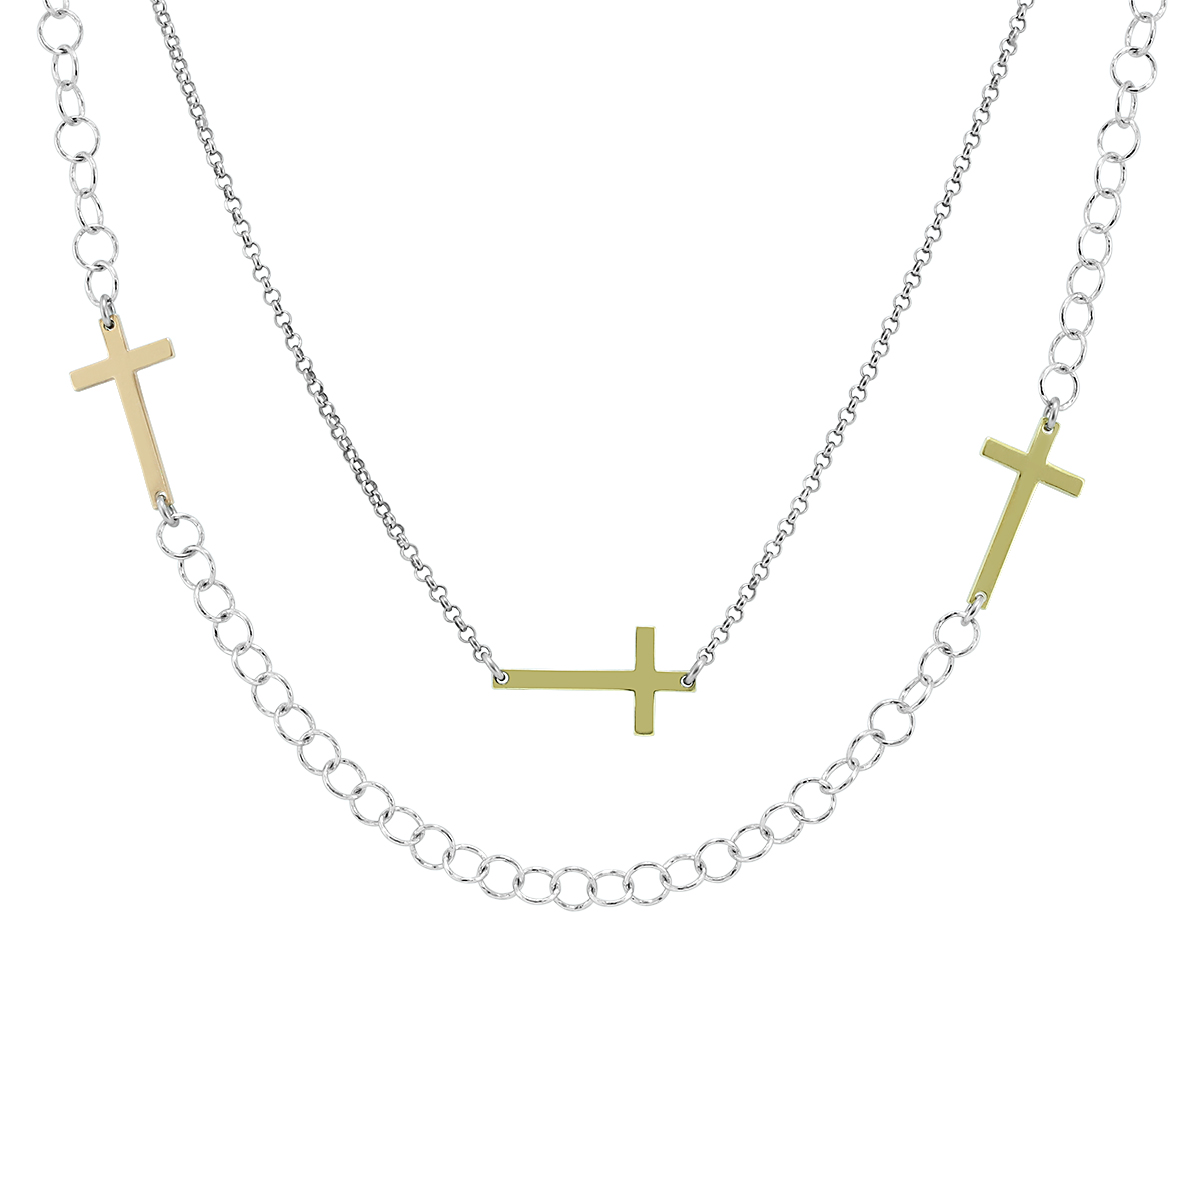 Long 46 inch Cross Necklace in .925 Sterling Silver